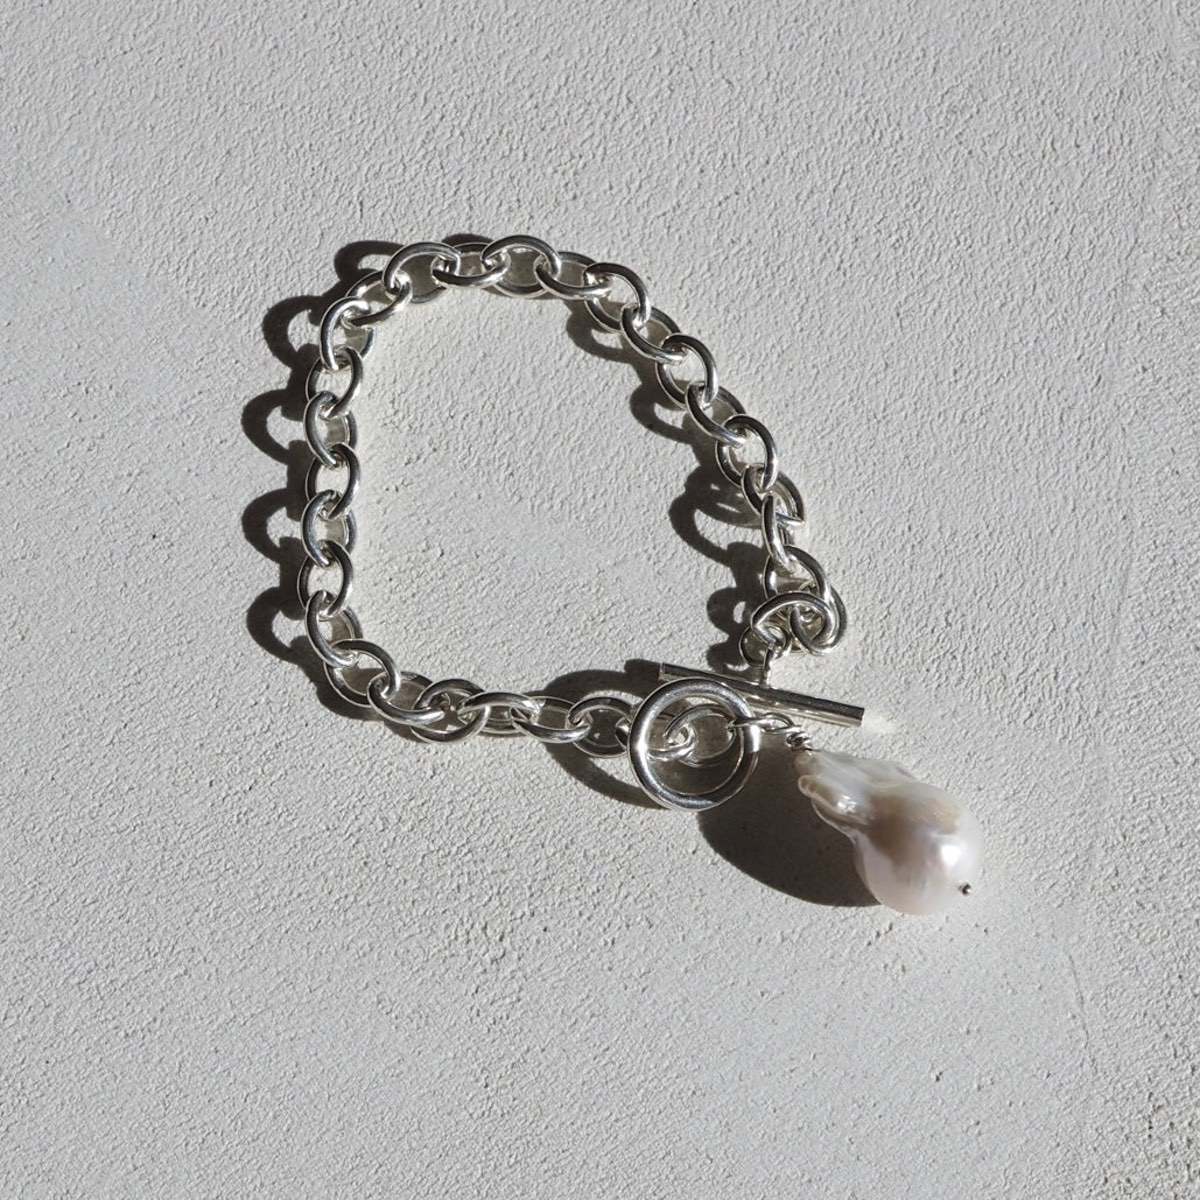 Hand wrapped freshwater baroque pearl: Beautiful sterling silver baroque pearl fob bracelet drenched in sunlight